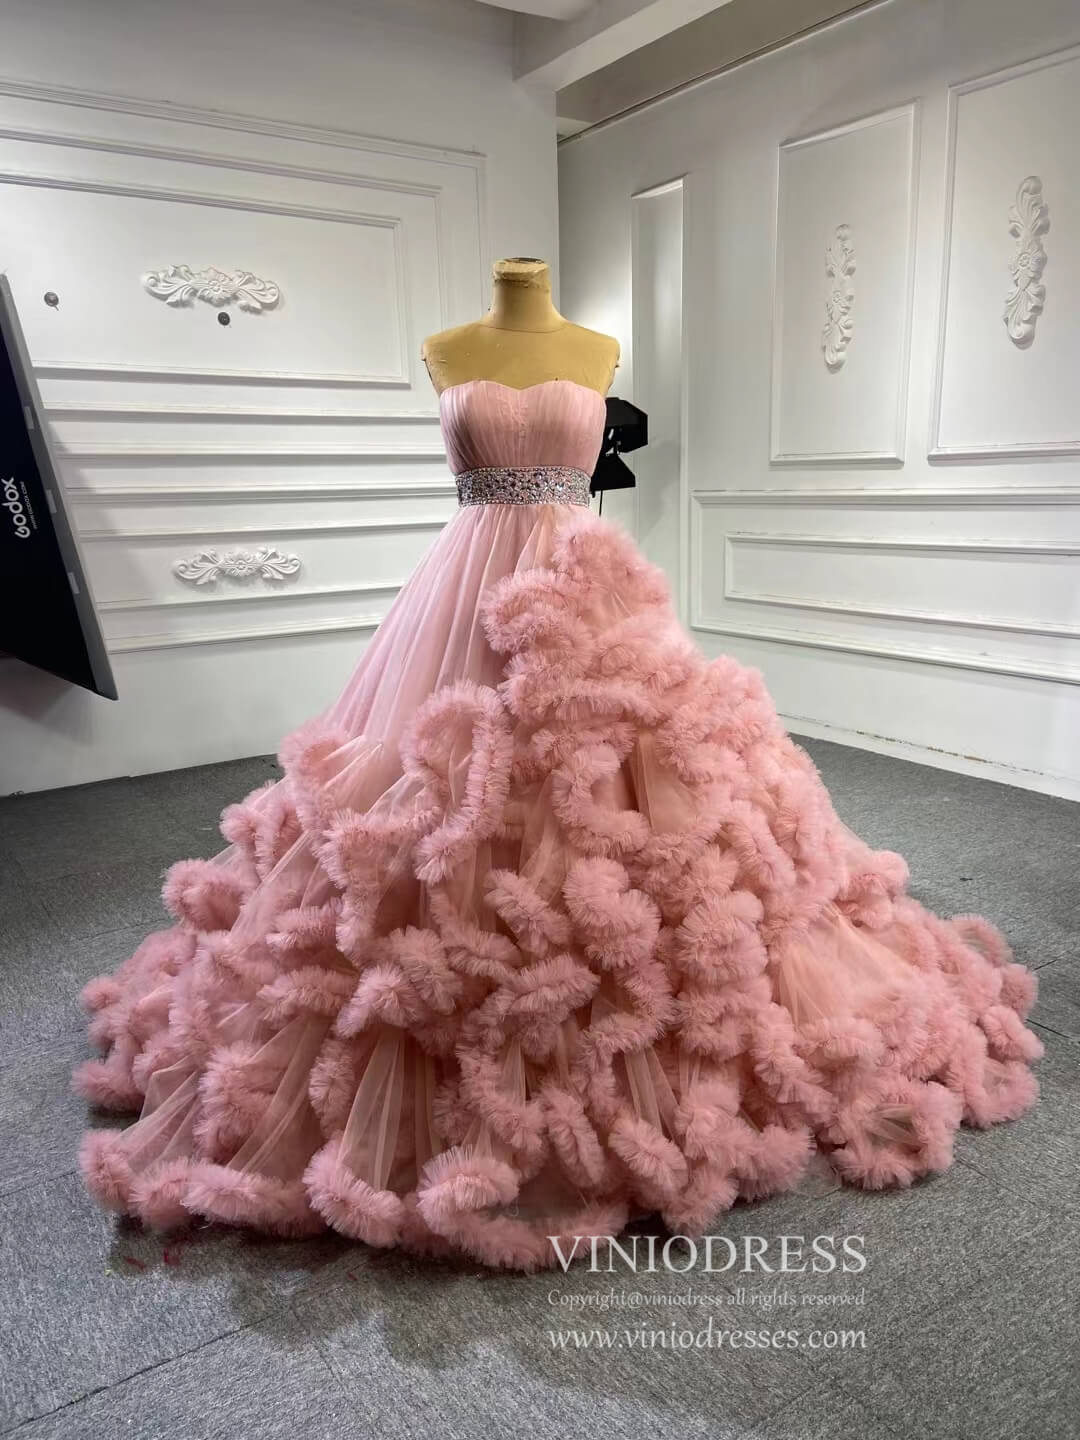 Ruffle Layered Vintage Ball Gown Strapless Couture Formal Dresses FD1169  viniodress - Dusty Rose / Custom Size